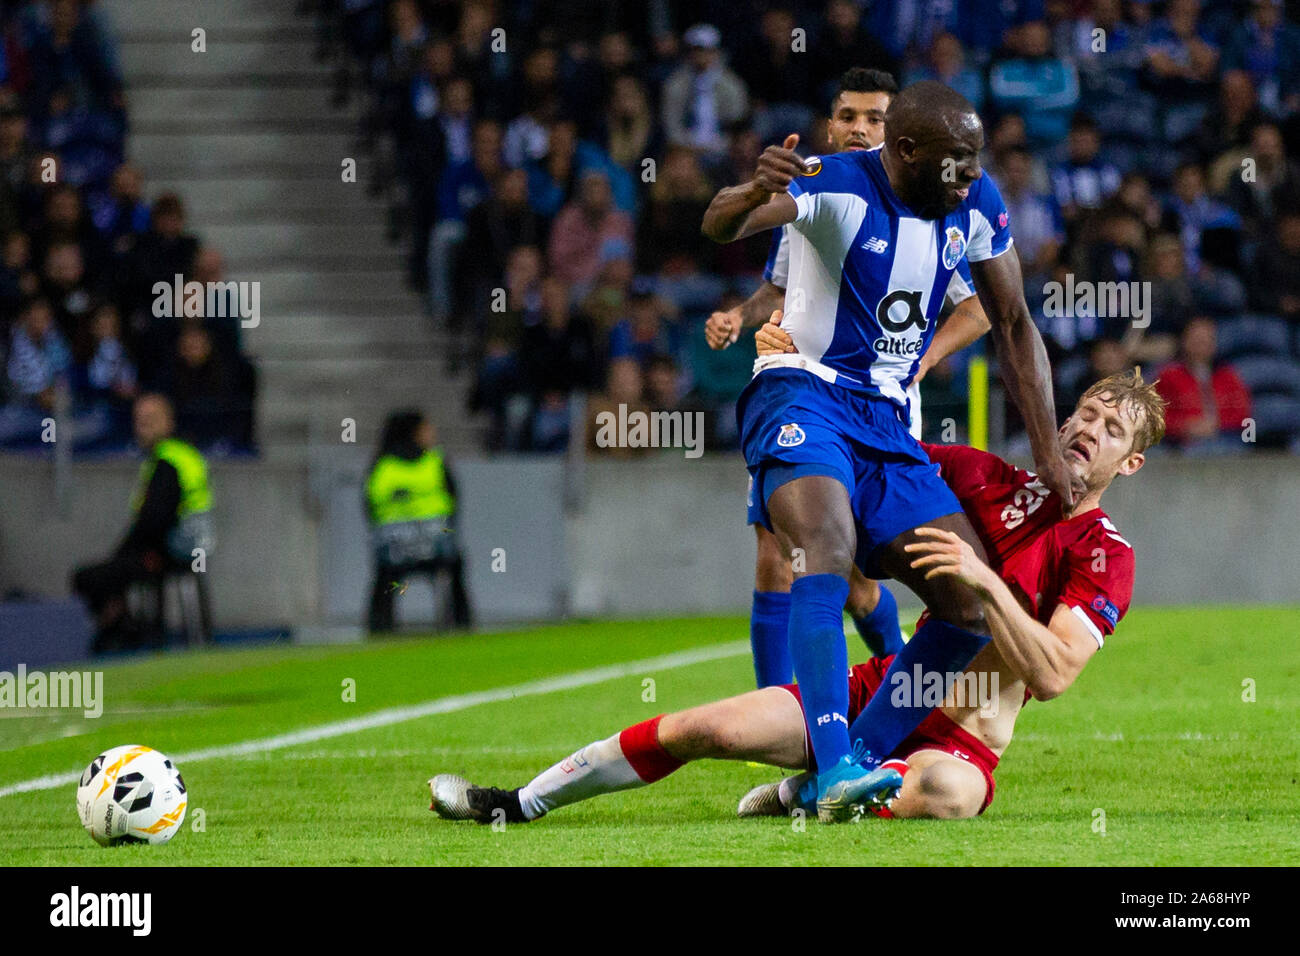 FC Porto's player Moussa Marega (L) and Ranger's player Filip Helander (R) are seen in action during the UEFA Europa League match at Dragon Stadium. (Final score: FC Porto 1:1 Rangers) Stock Photo